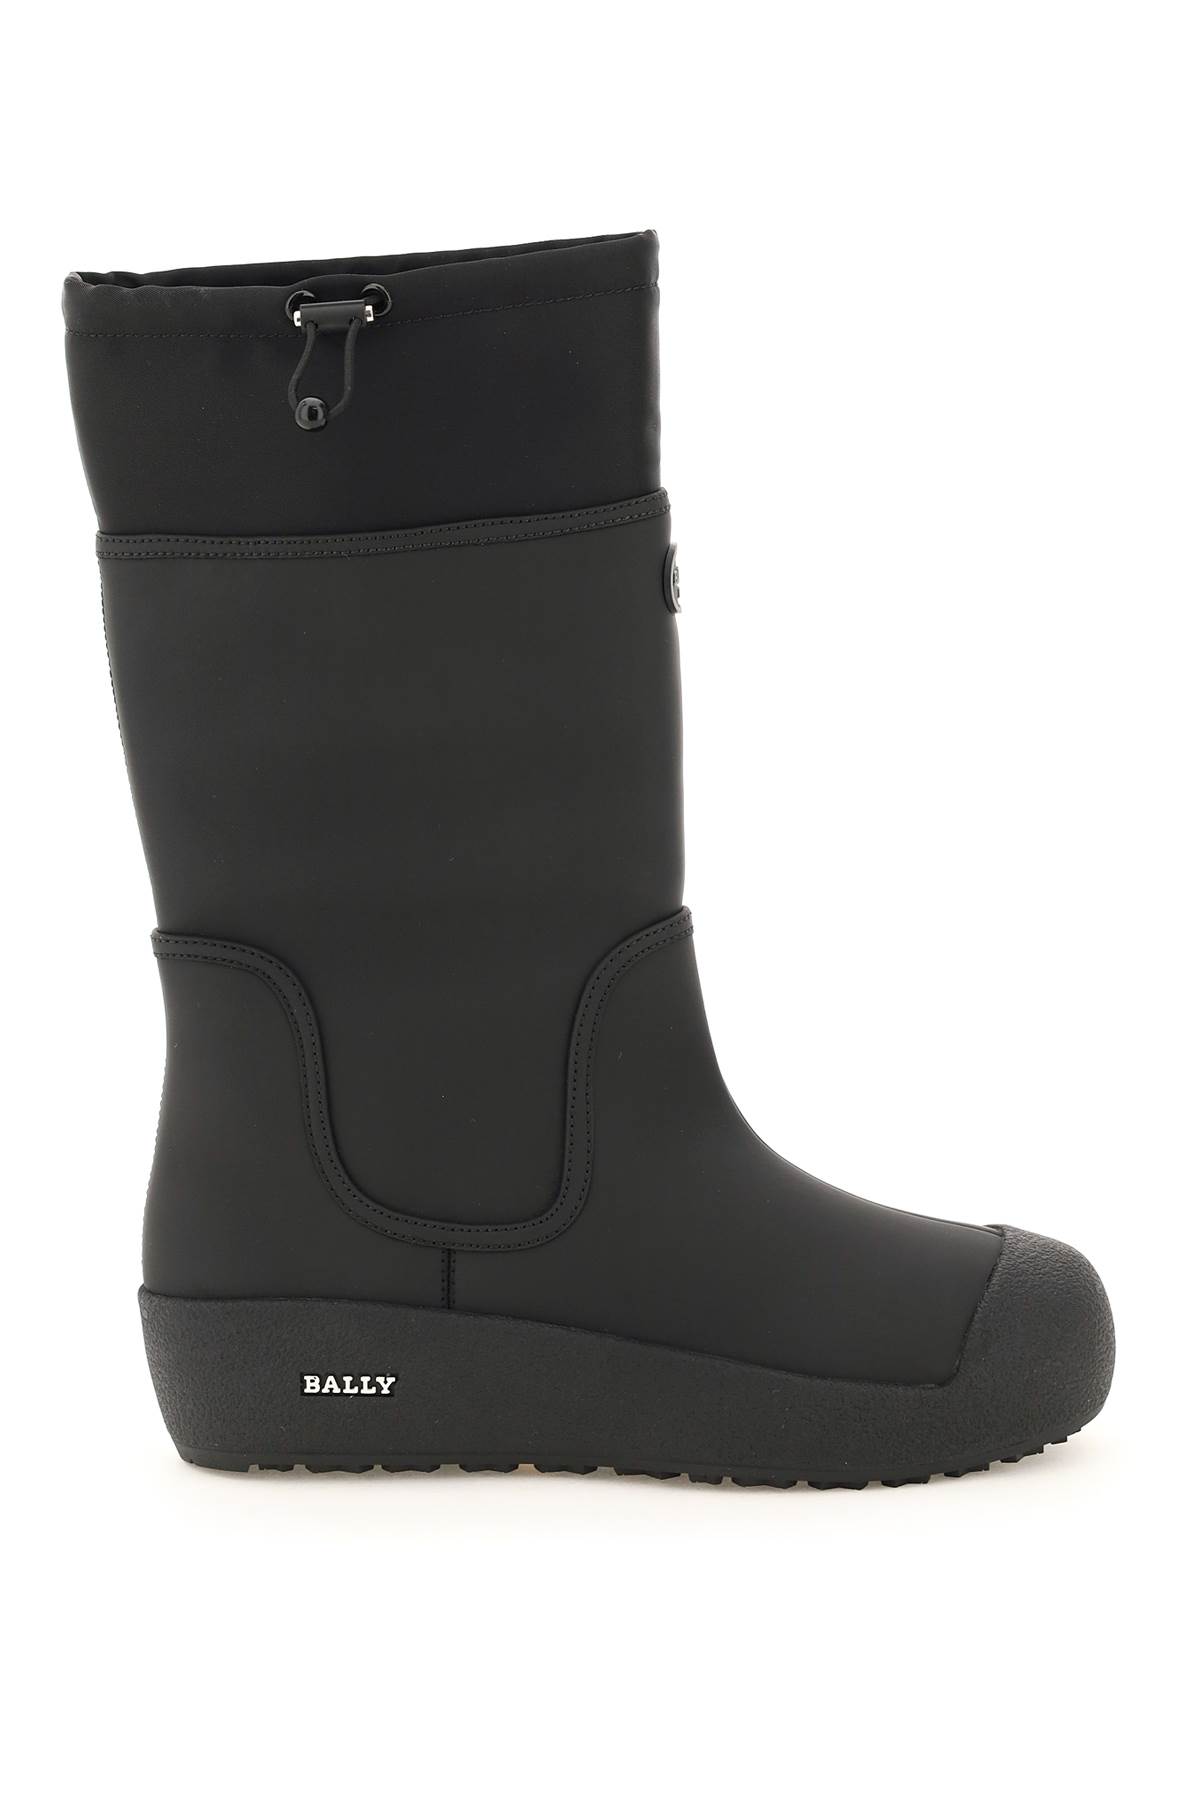 Bally Rubber-coated Leather Boots